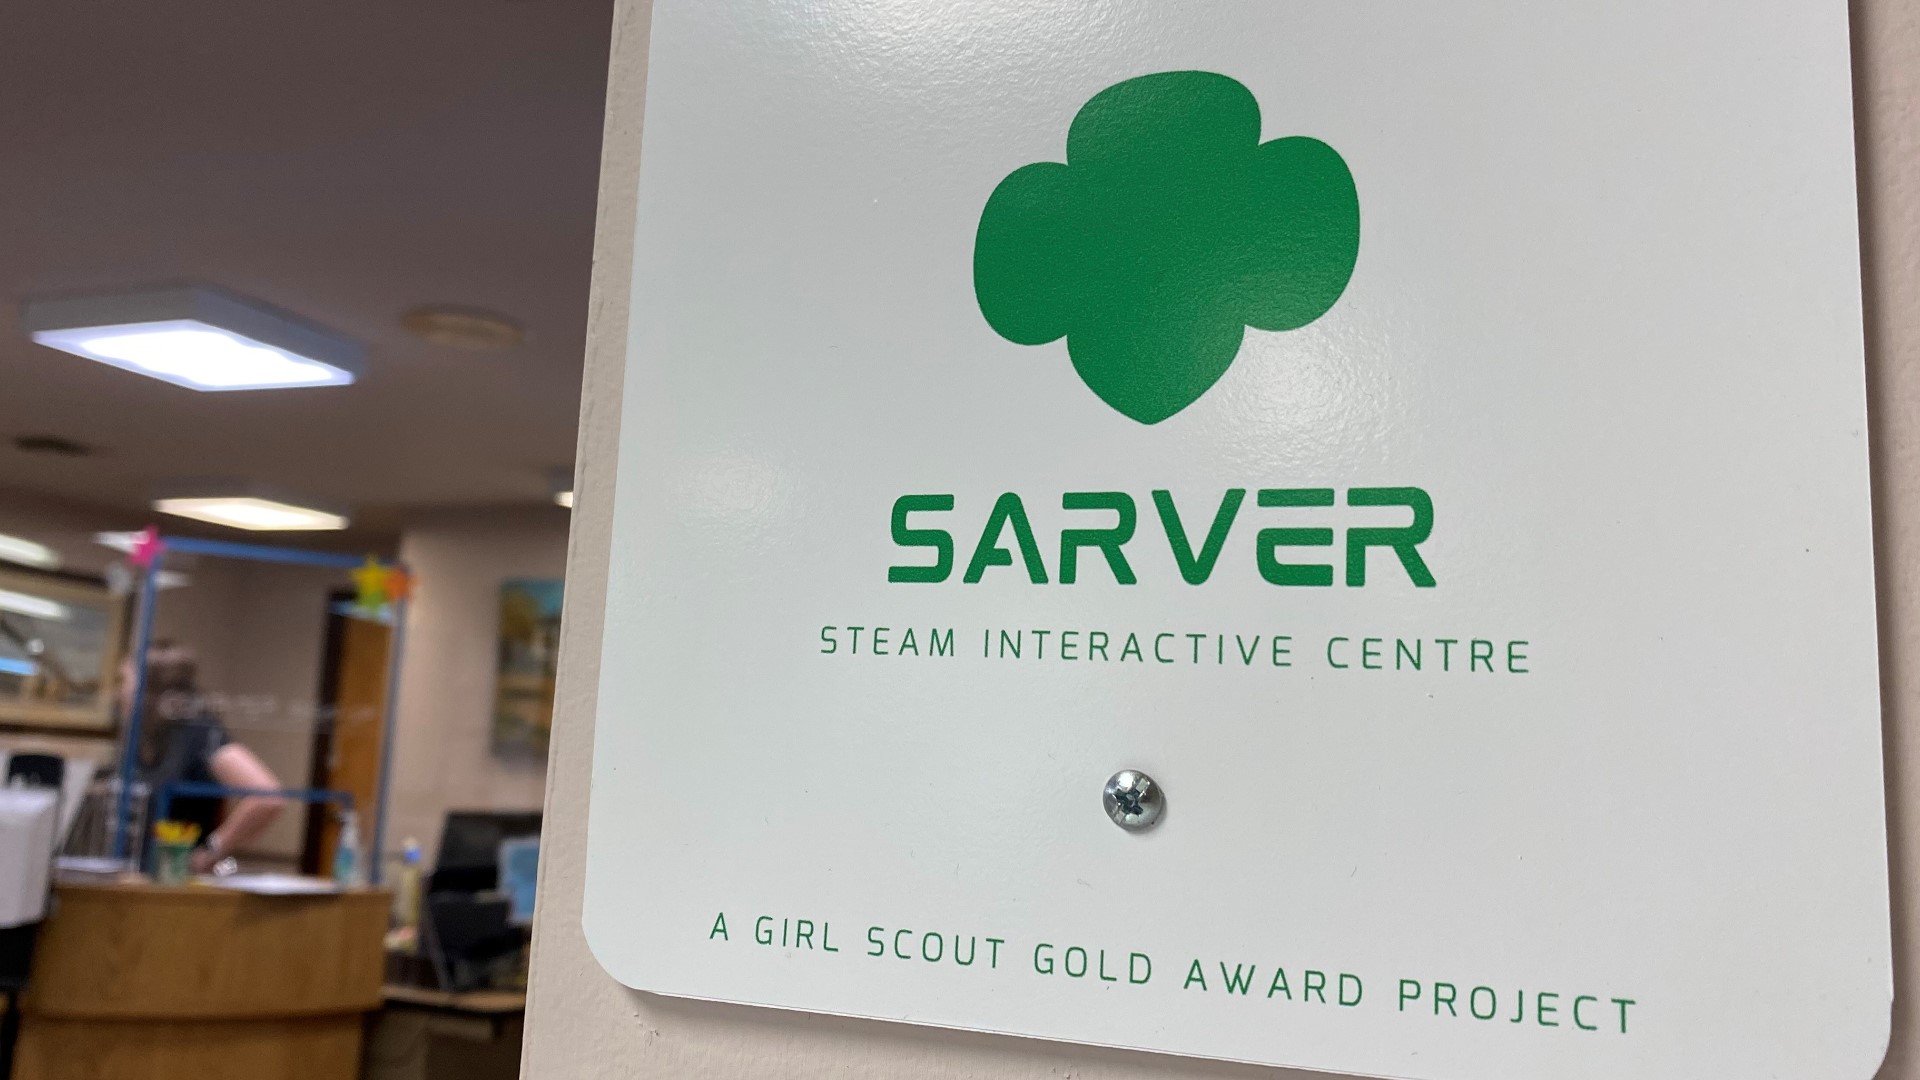 A high school senior, and girl scout spent her summer crafting and completing a new interactive STEAM centre for younger students.